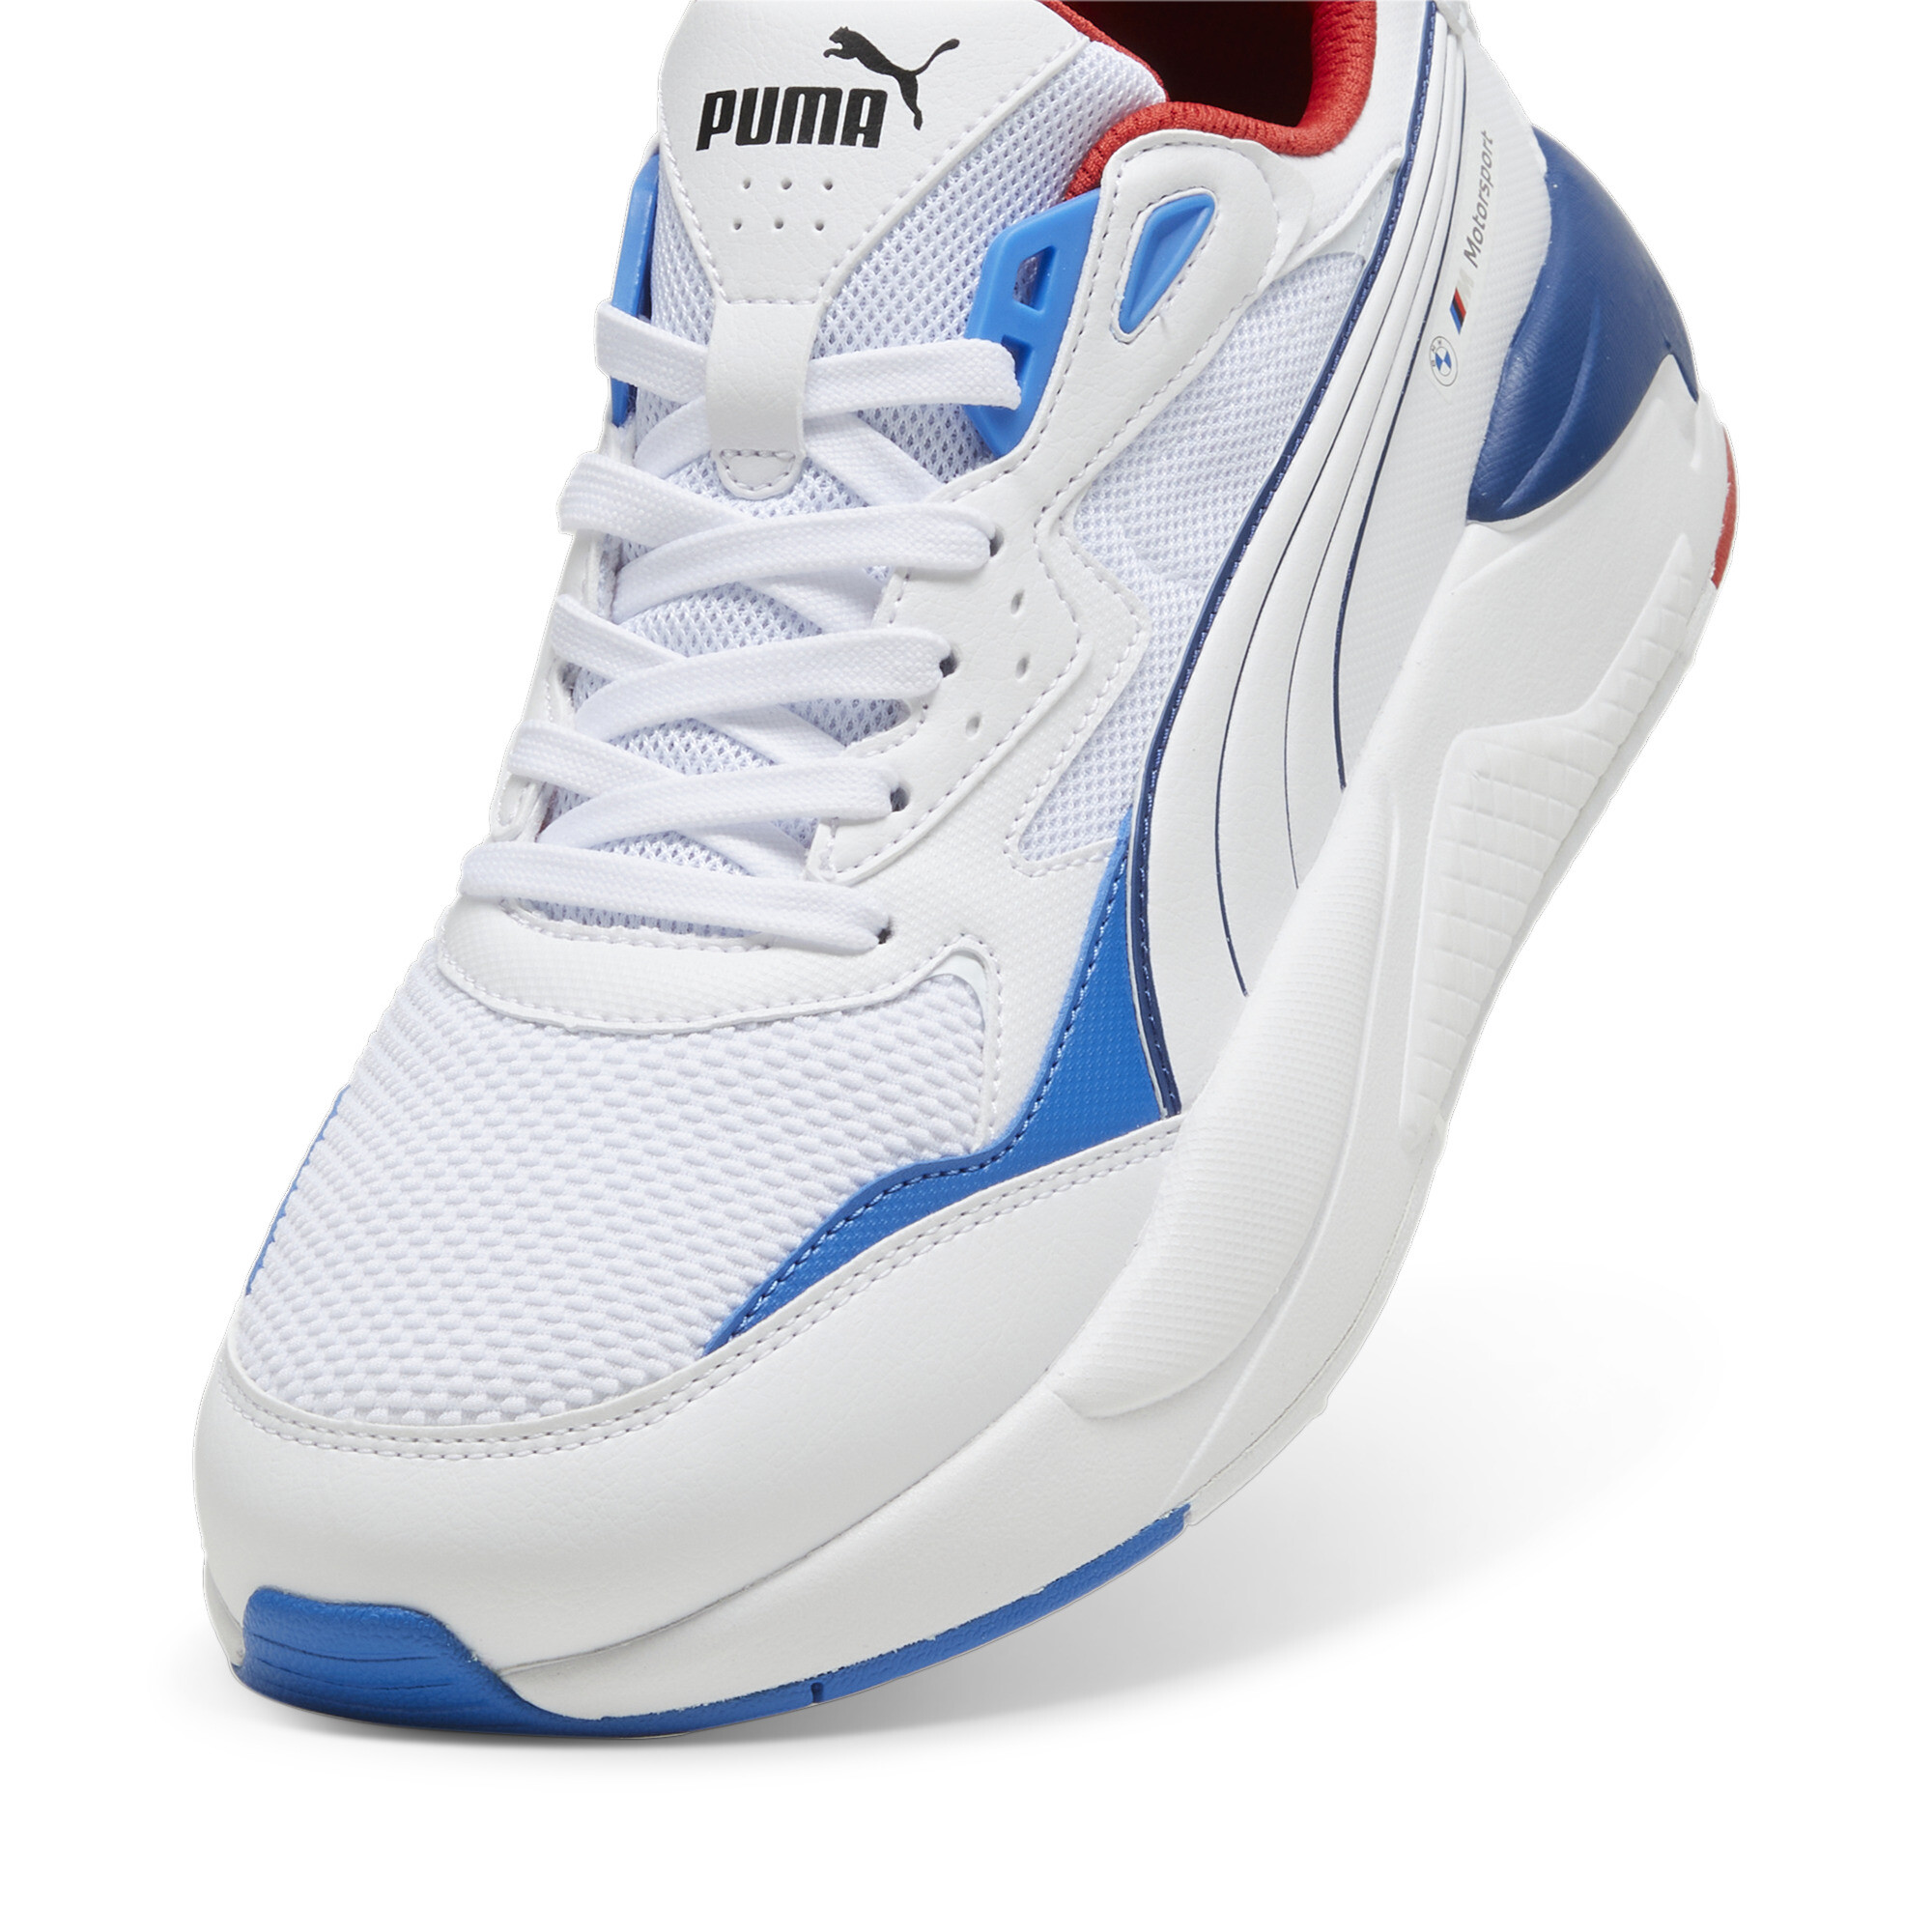 Puma BMW M Motorsport X-Ray Speed Motorsport Shoes, White, Size 45, Shoes